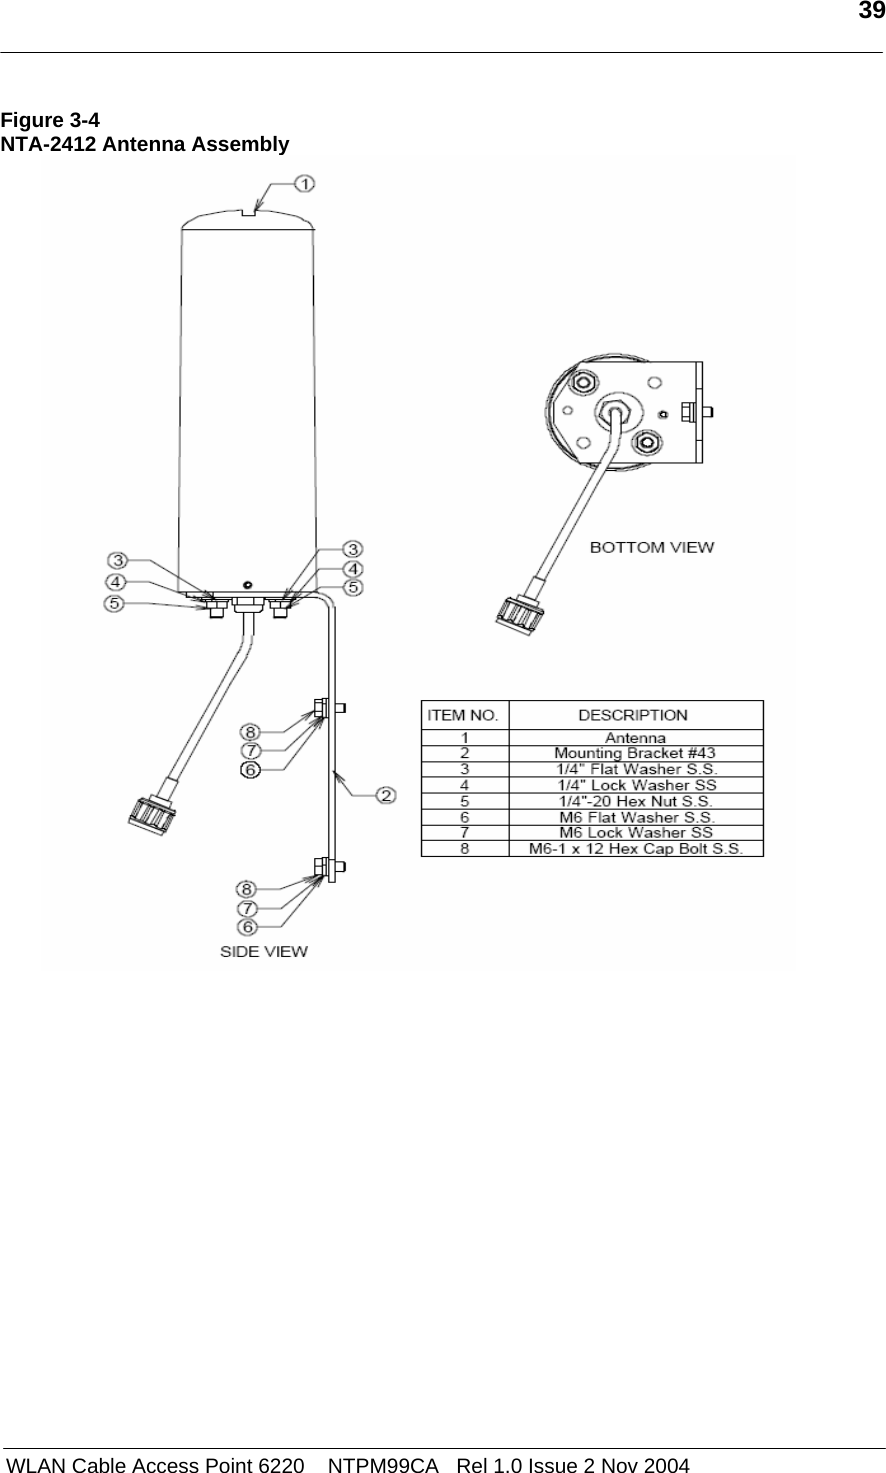   39   WLAN Cable Access Point 6220    NTPM99CA   Rel 1.0 Issue 2 Nov 2004 Figure 3-4 NTA-2412 Antenna Assembly  